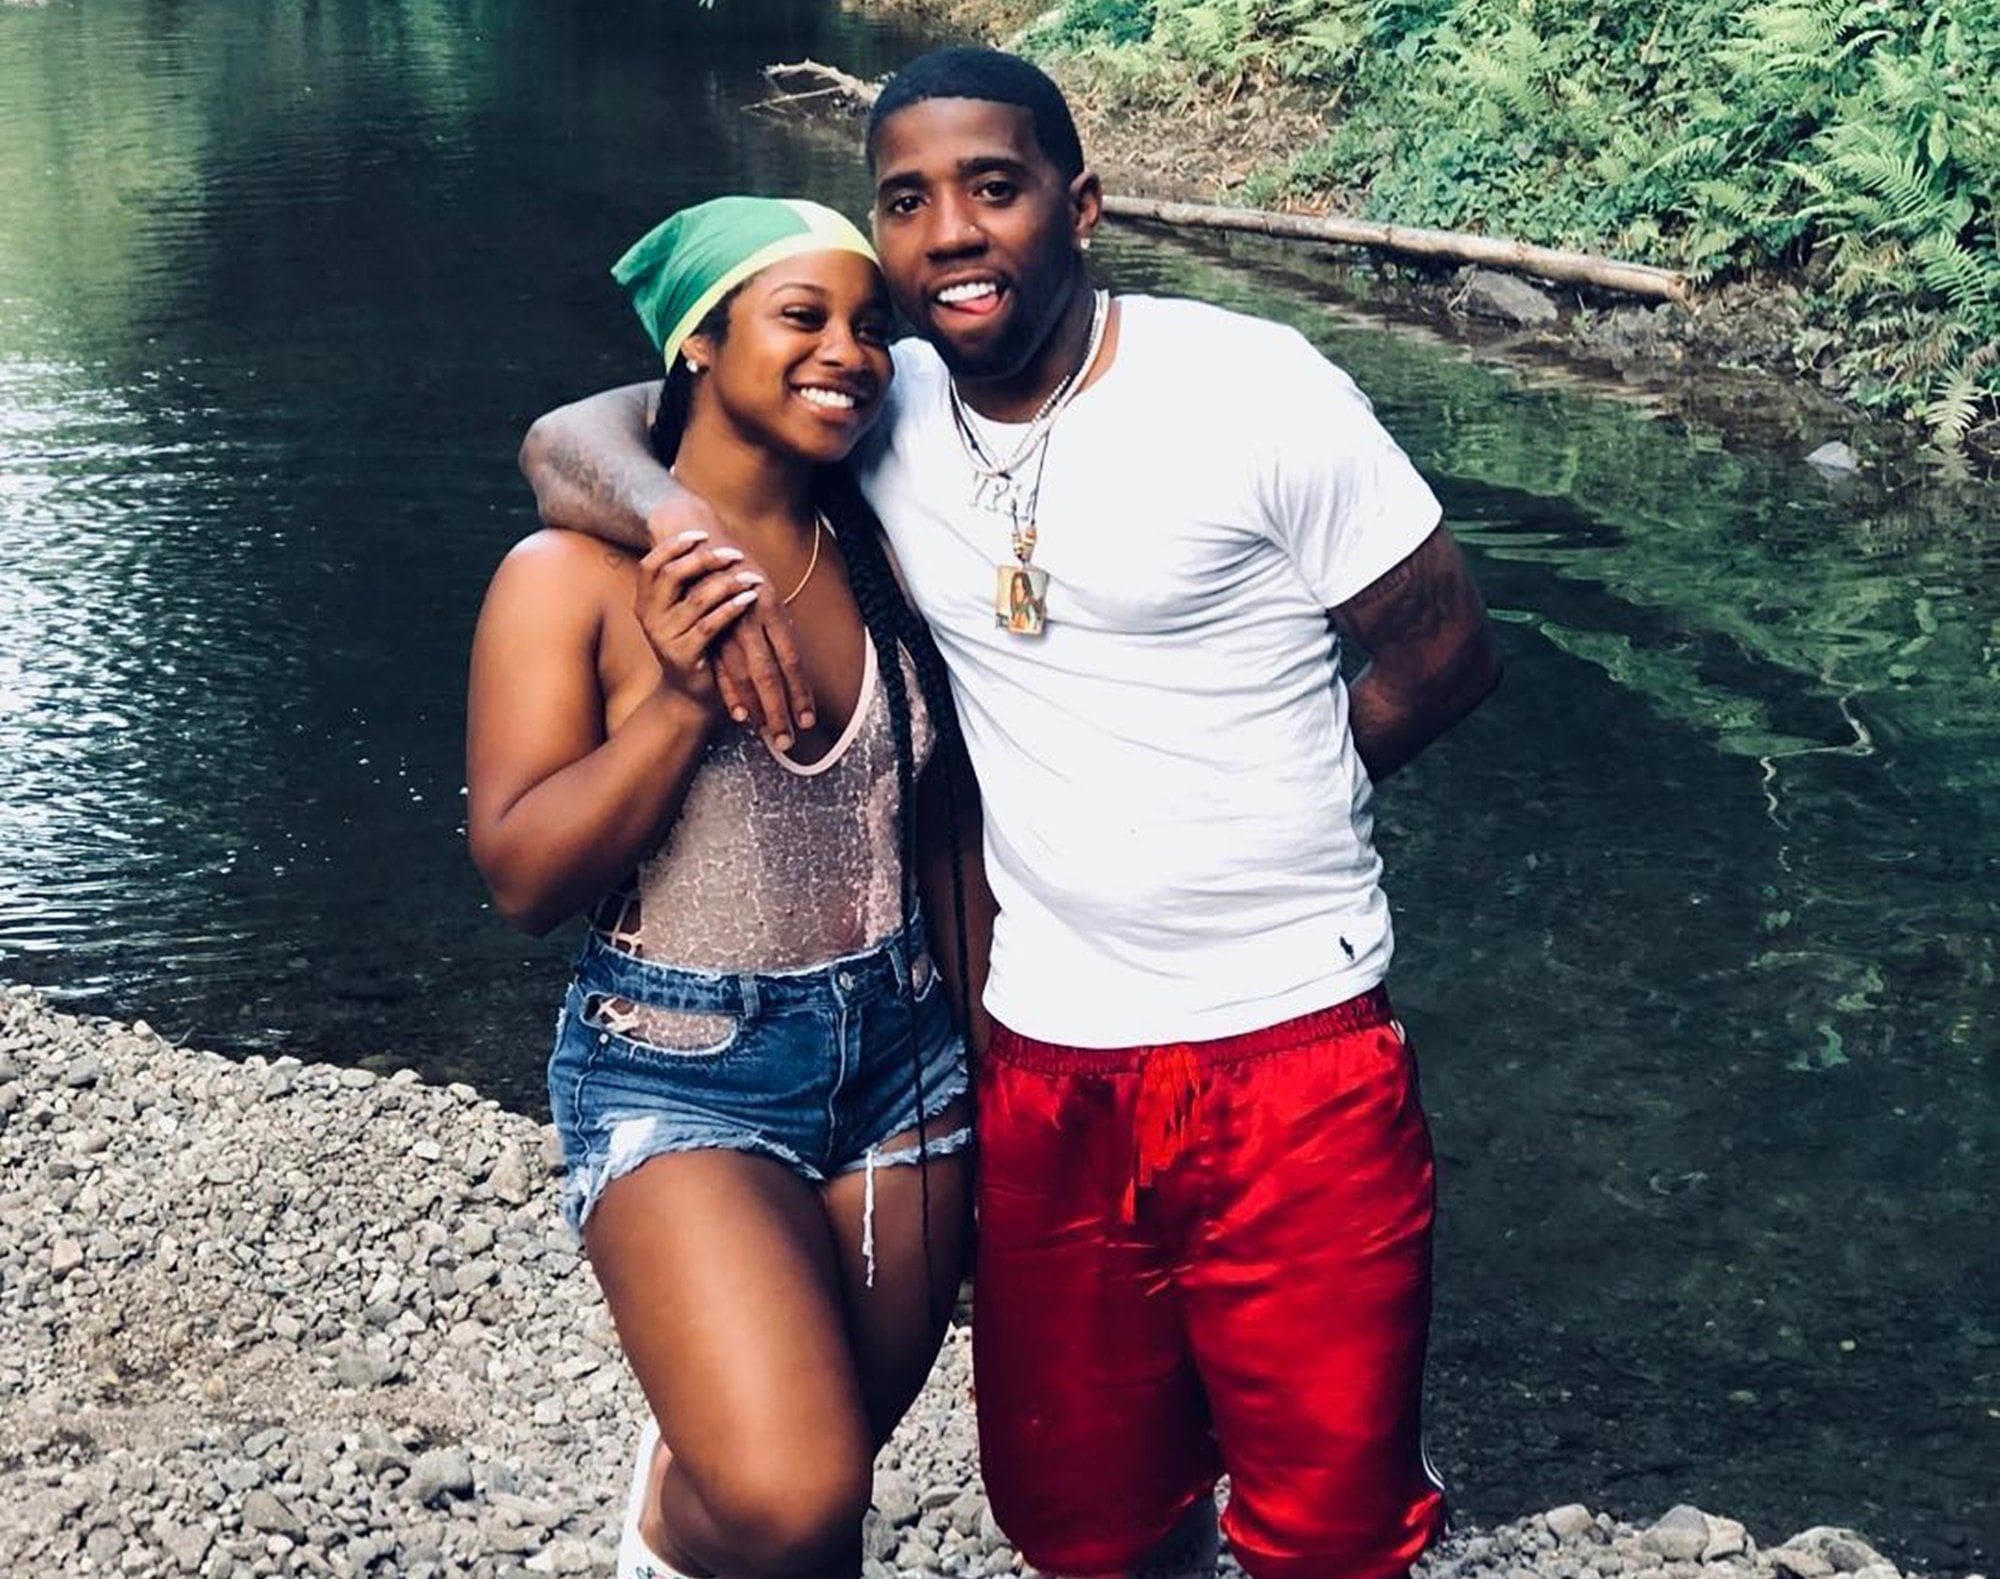 Reginae Carter Is Killing This Look: Check Out Her New Hourglass Figure That Drives Everyone Crazy!